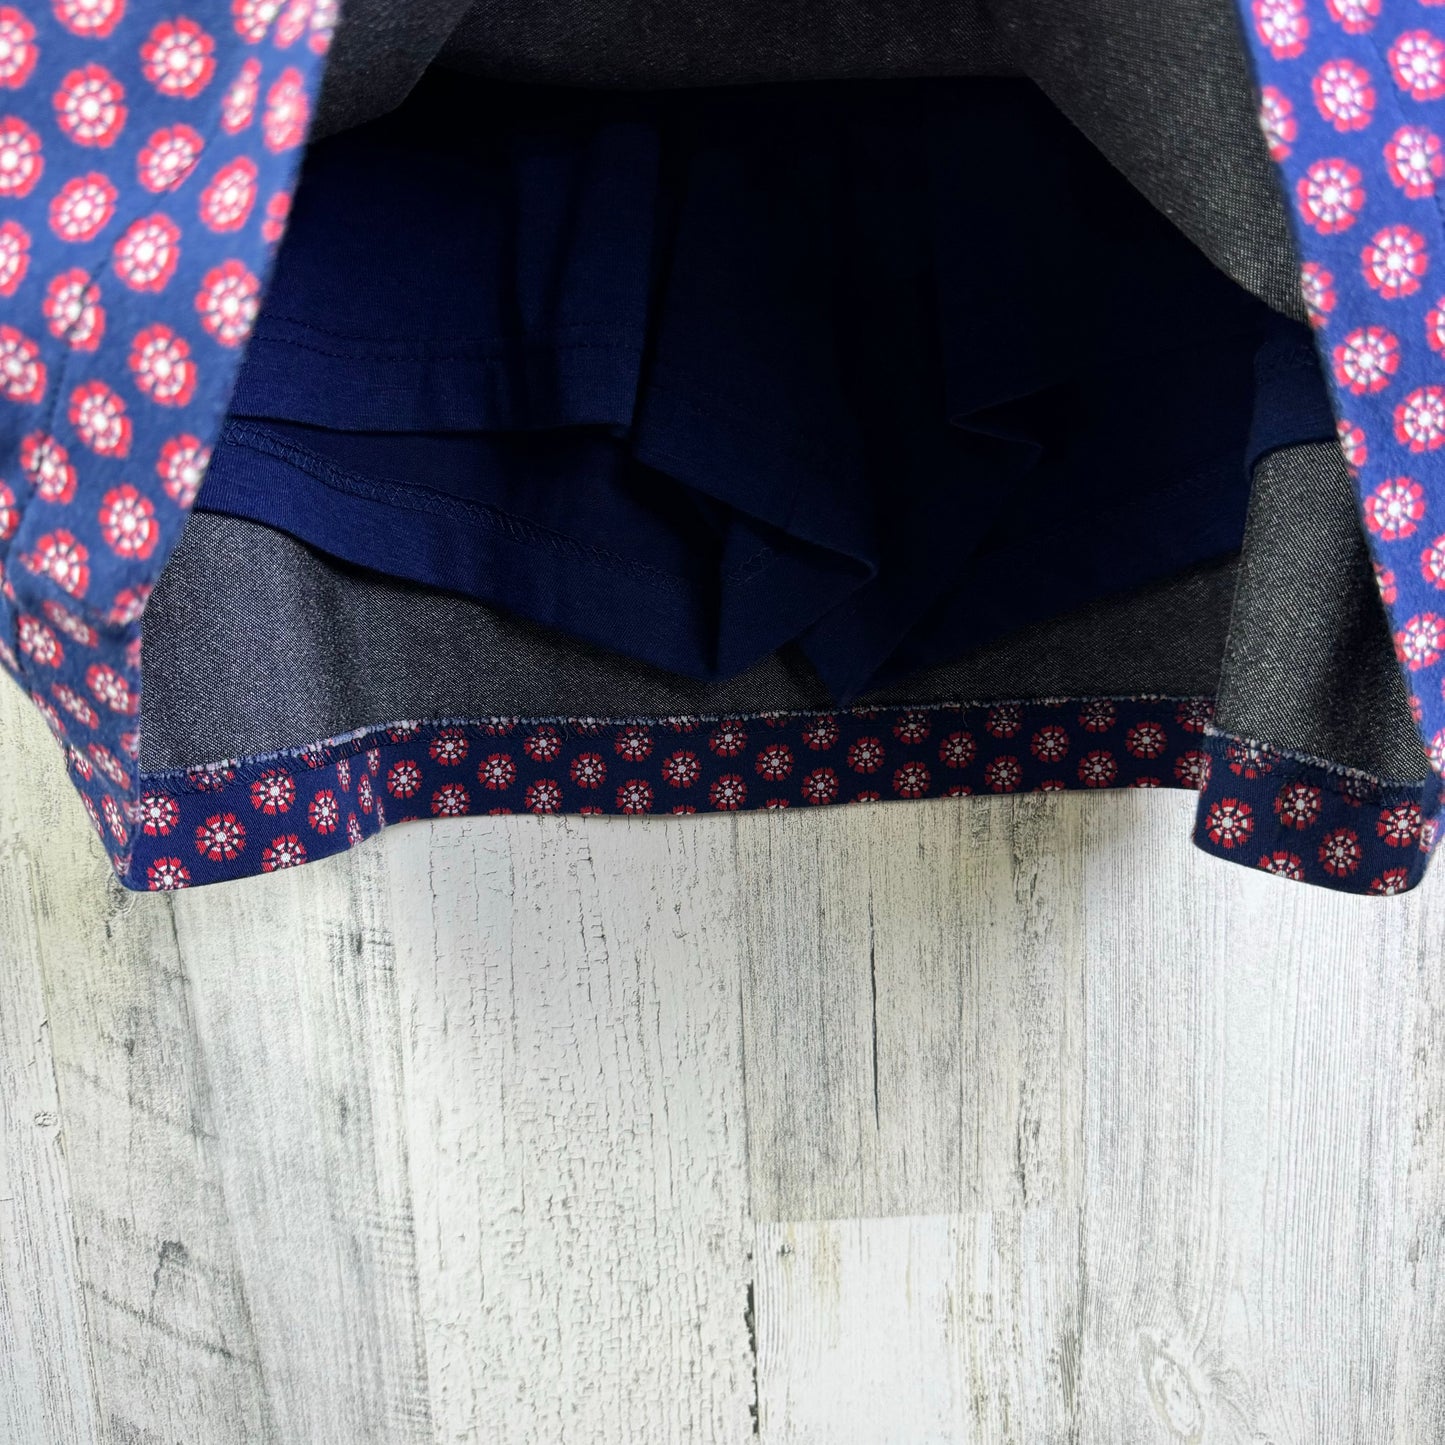 Blue & Red Skort Croft And Barrow, Size 16